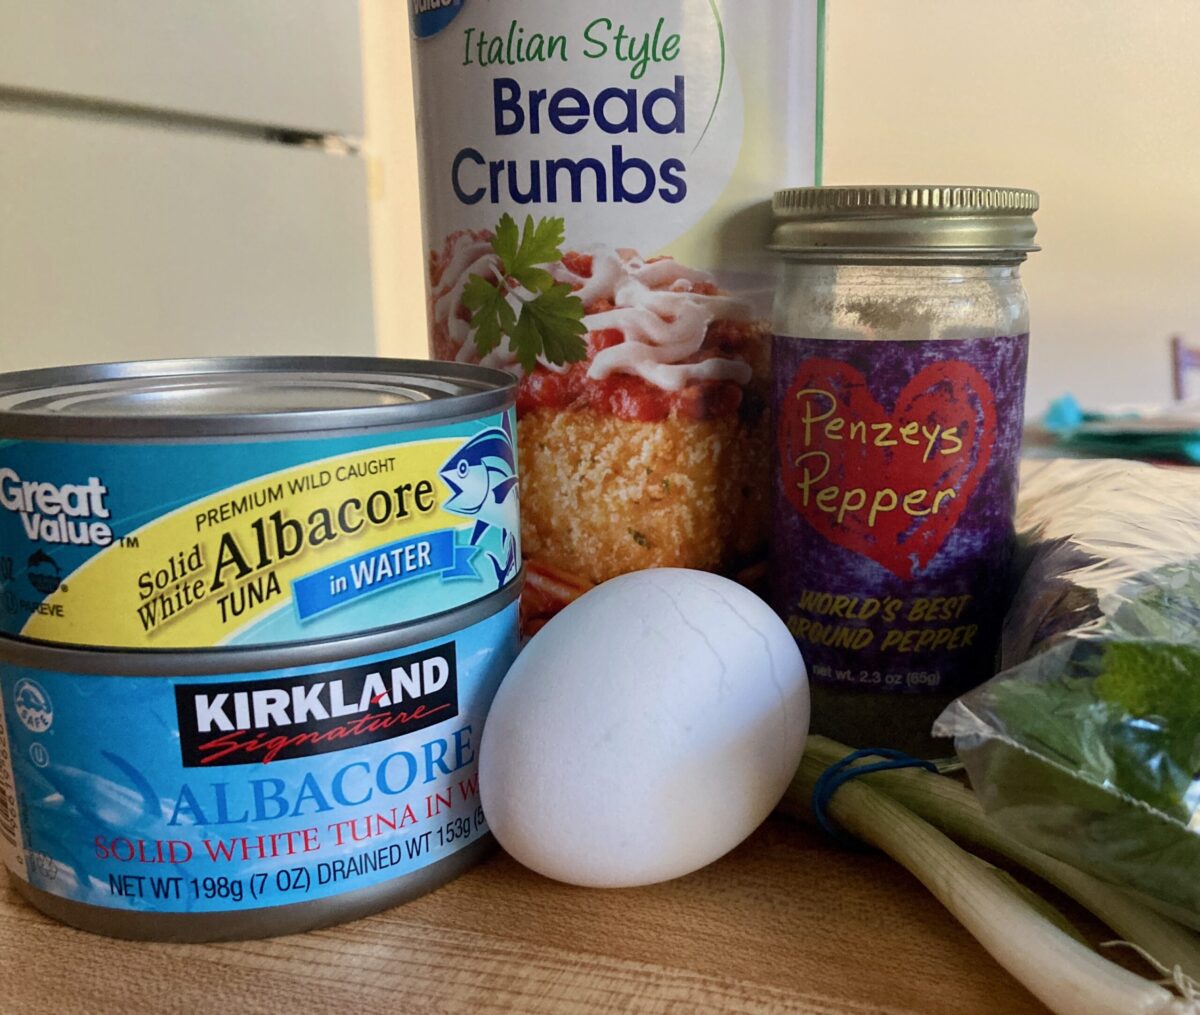 Ingredients for making tuna patties including canned tuna, bread crumbs, egg and spices.